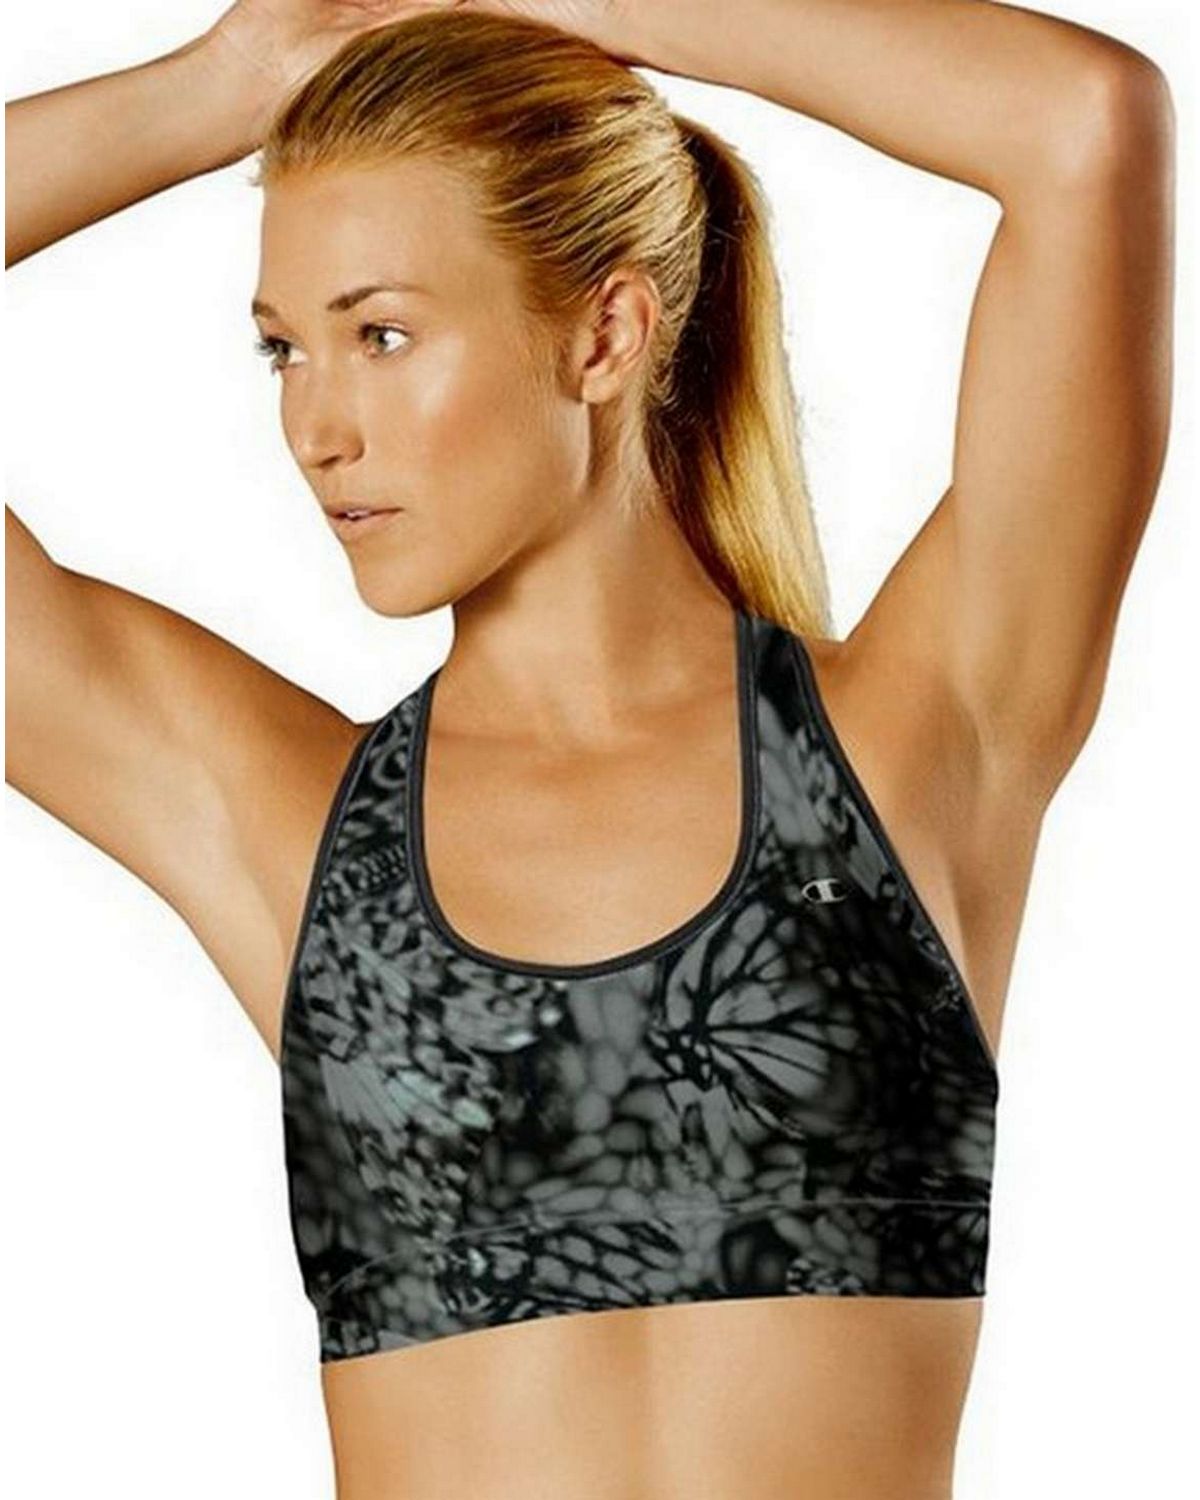 Champion B9504 Women's Absolute Racerback Sports Bra with SmoothTec Band